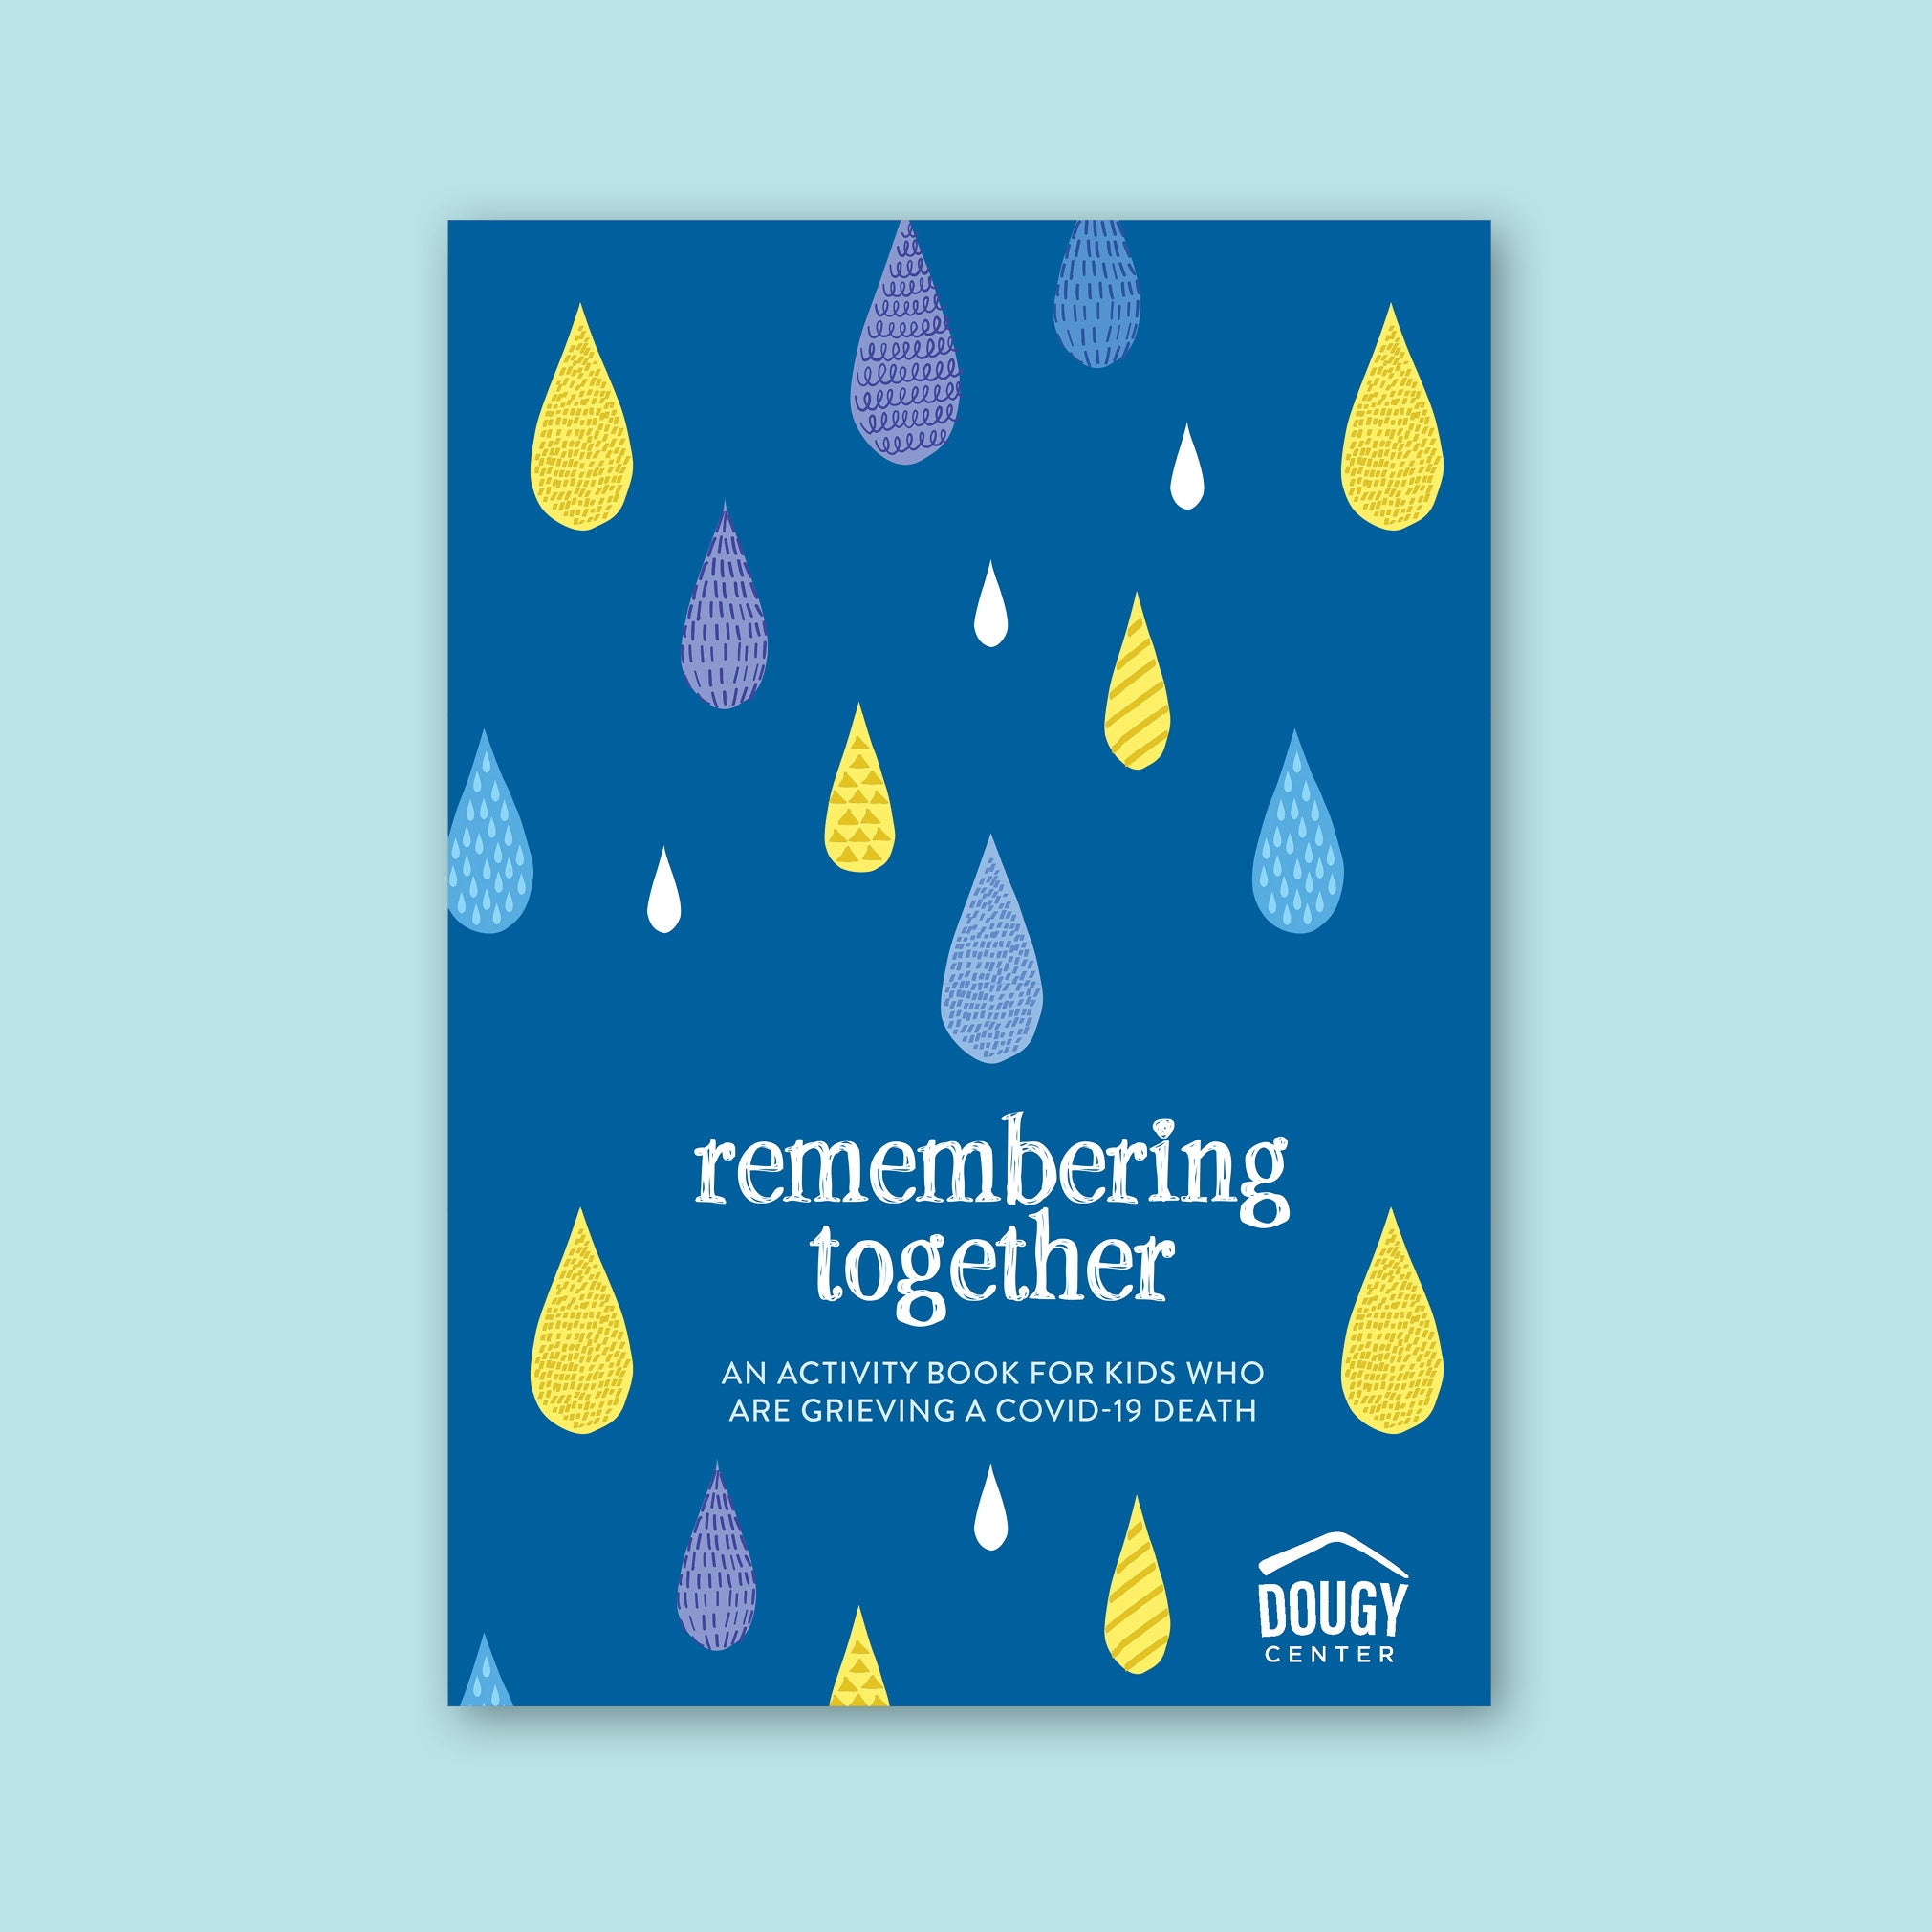 Remembering Together: An Activity Book for Kids who are Grieving a COVID-19 Death